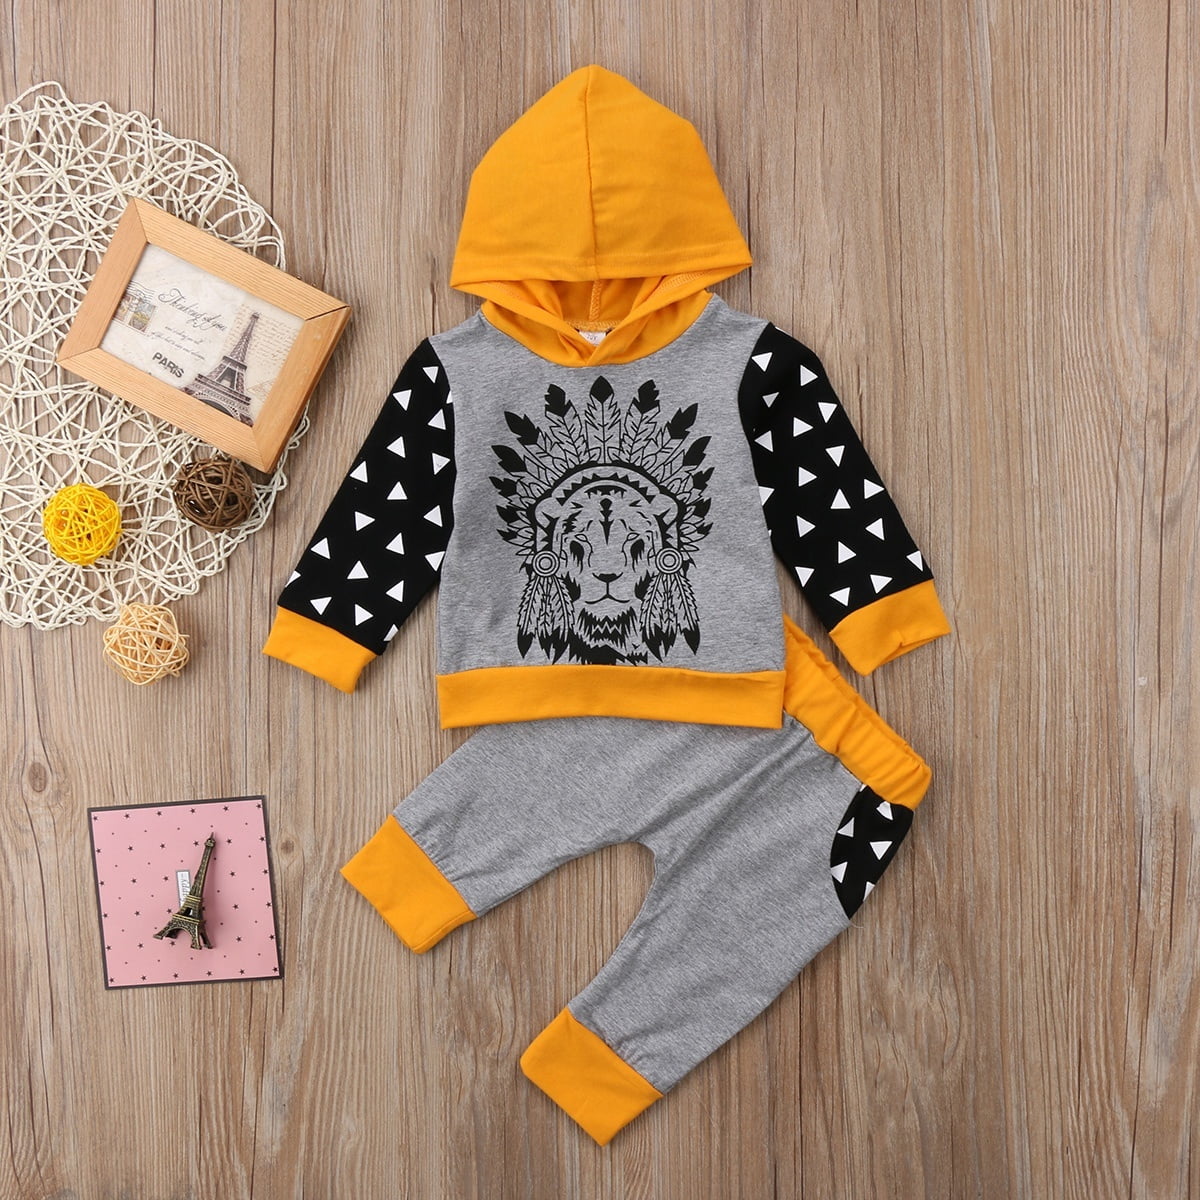 2PCS Toddler Infant Kid Baby Boy Girl Clothes Lion Hoodie Tops+Pants Outfits Set